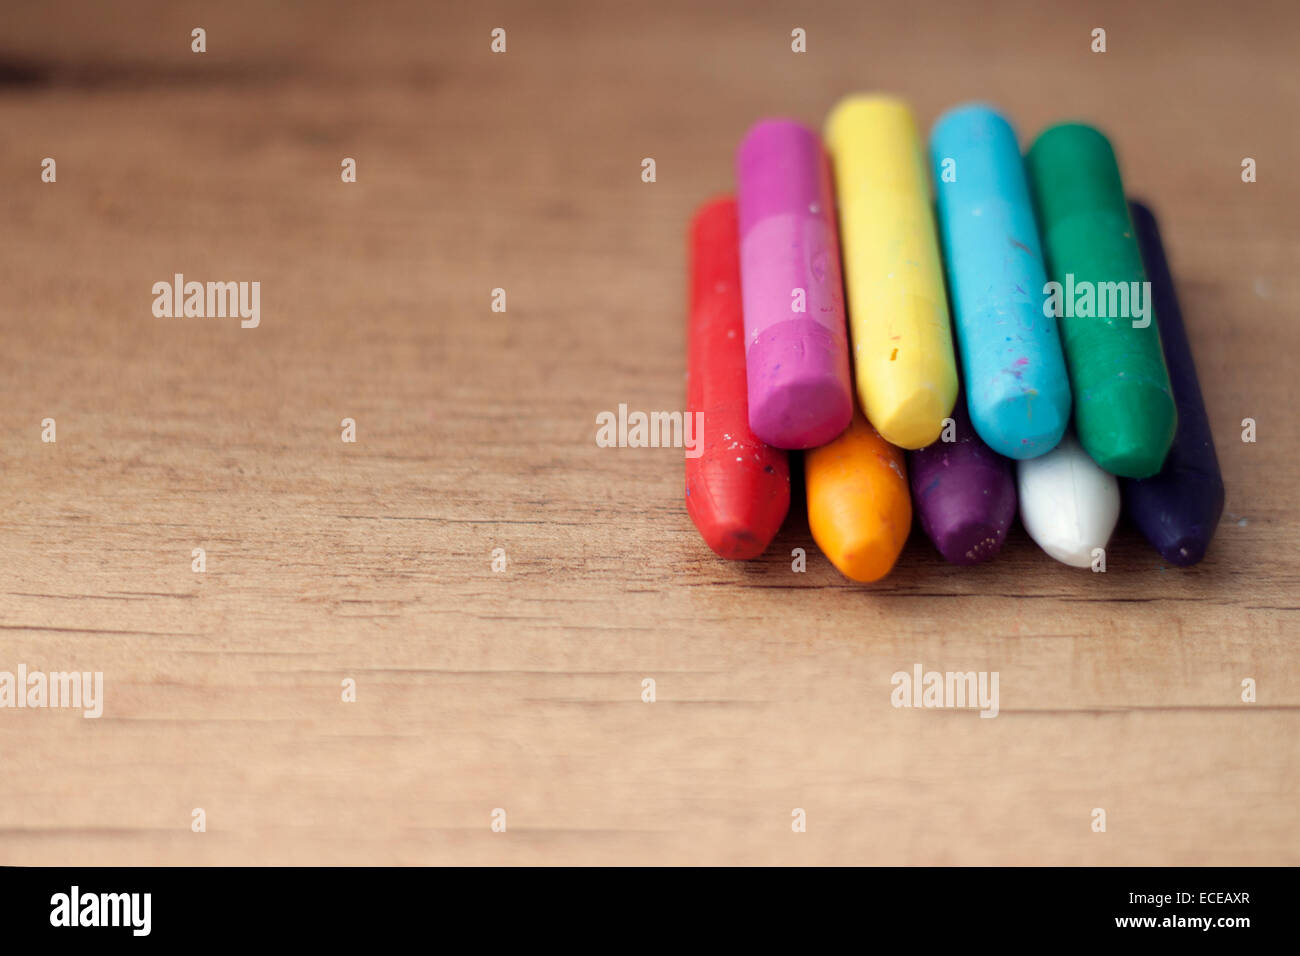 Crayons on table Stock Photo